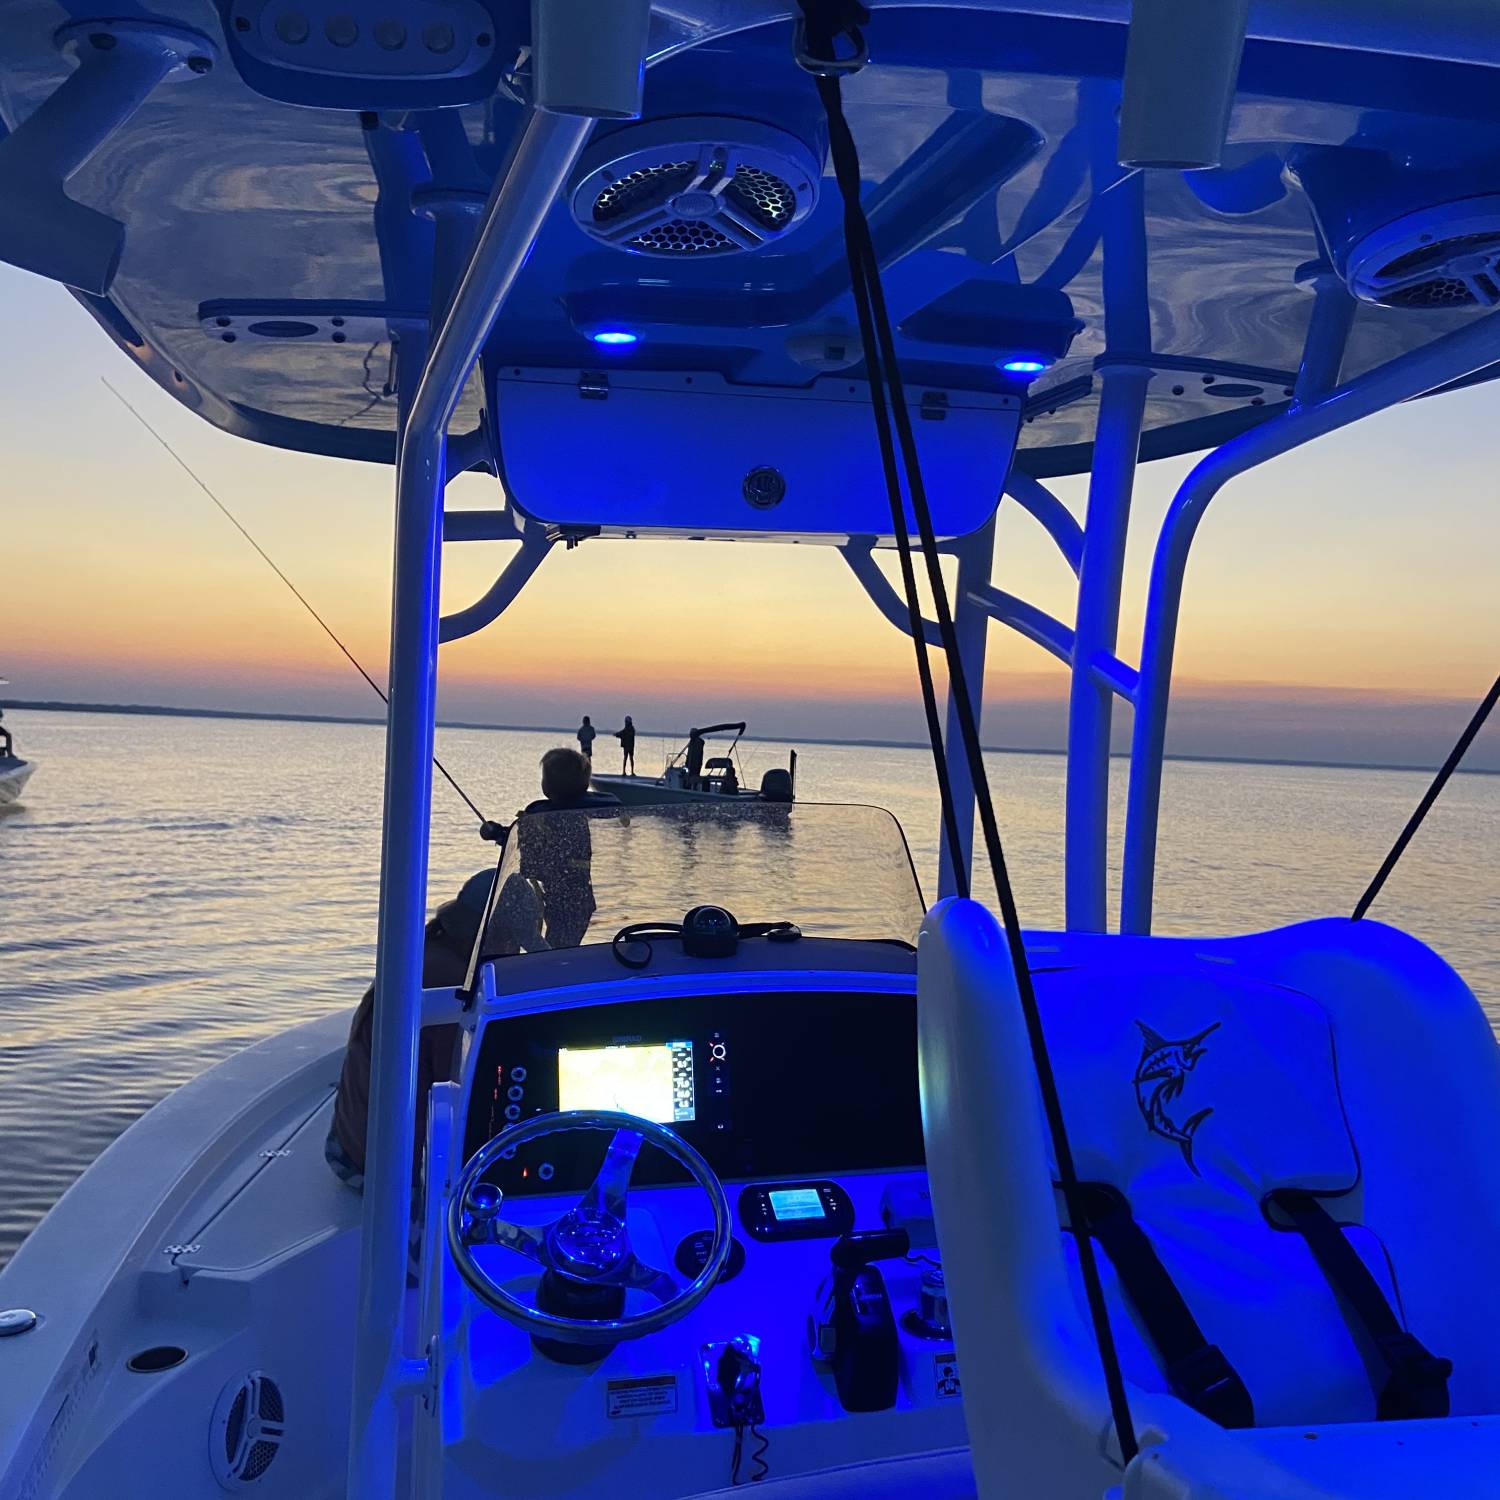 Title: Evening Cast - On board their Sportsman Masters 227 Bay Boat - Location: Lake George. Participating in the Photo Contest #SportsmanMarch